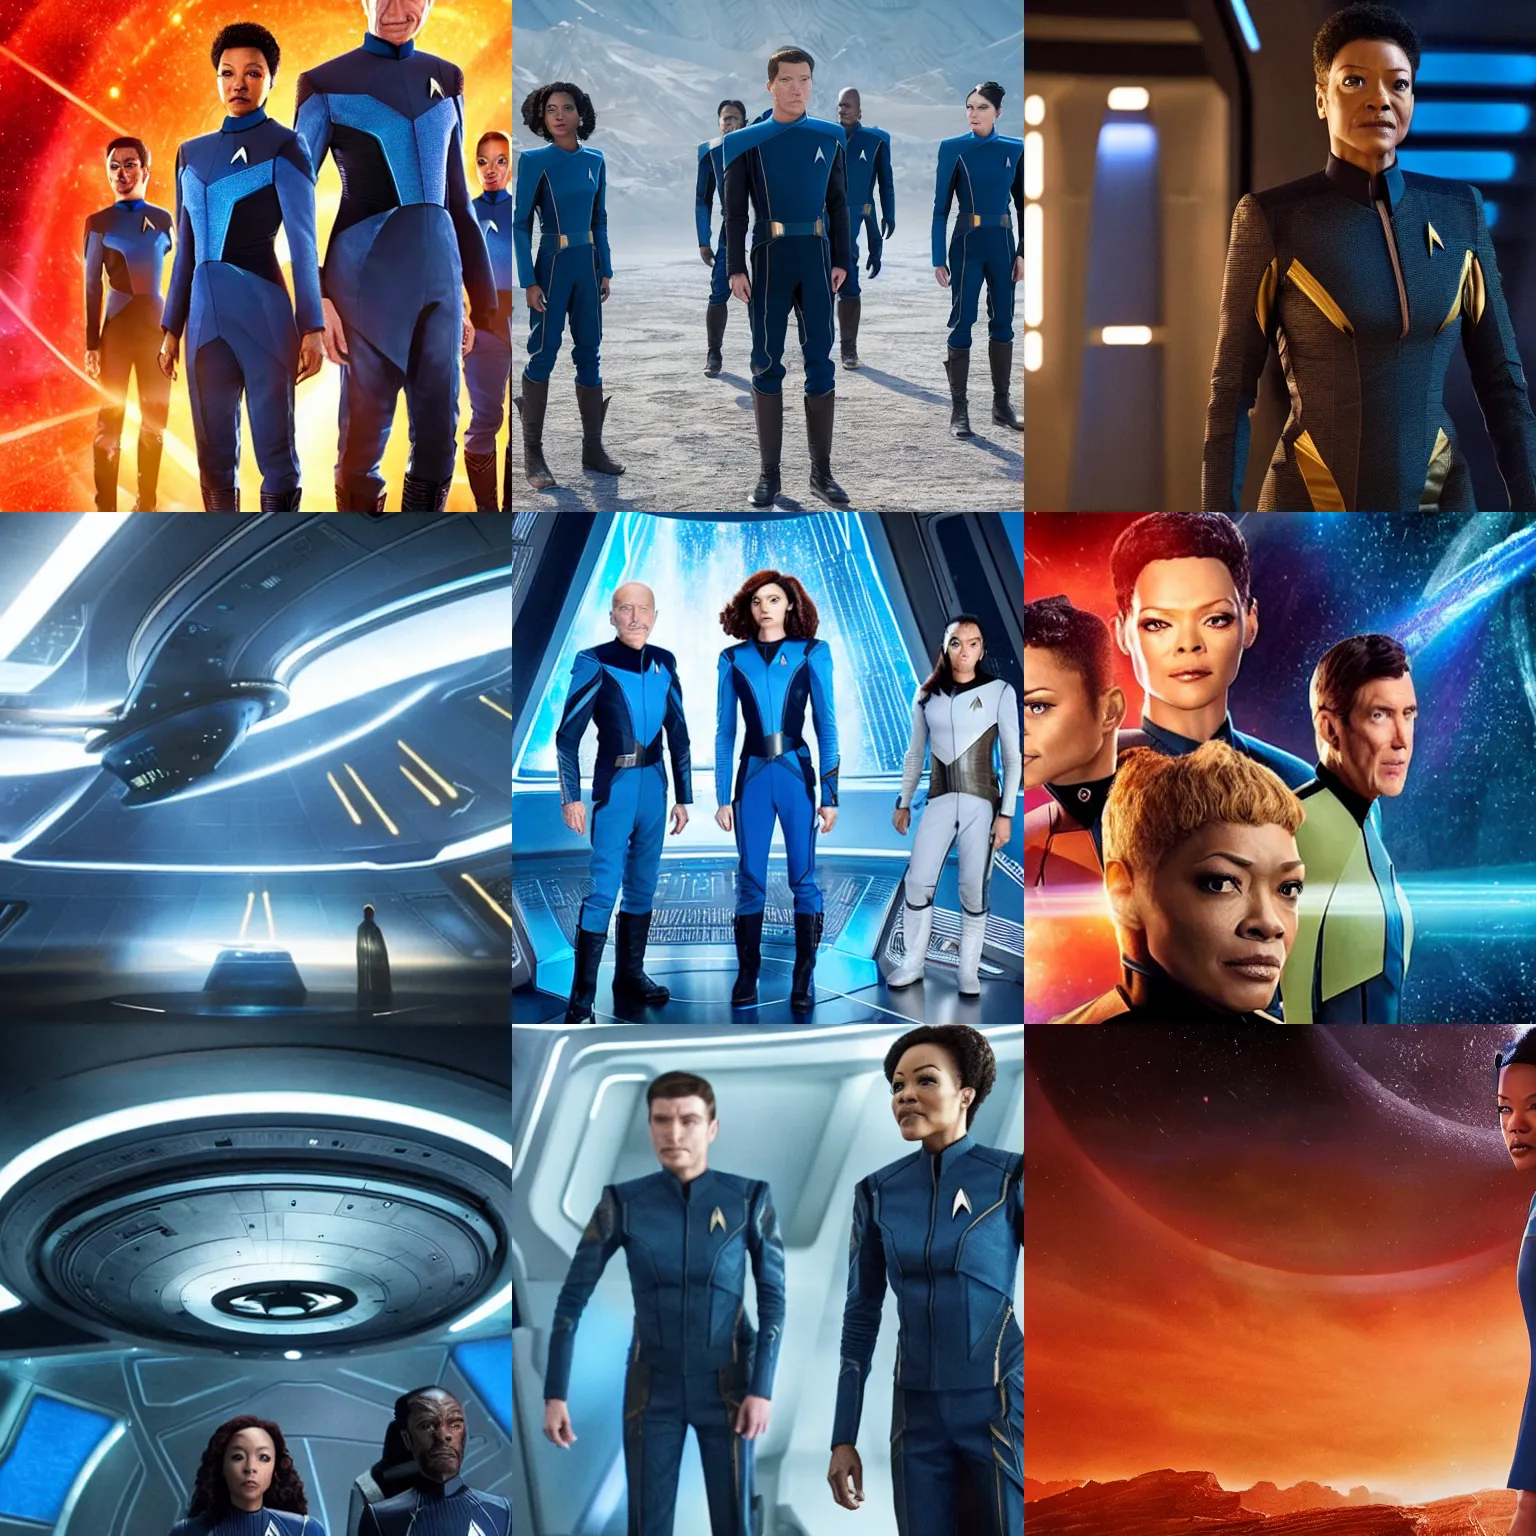 Prompt: Promotional image from Star Trek: Discovery (2017)